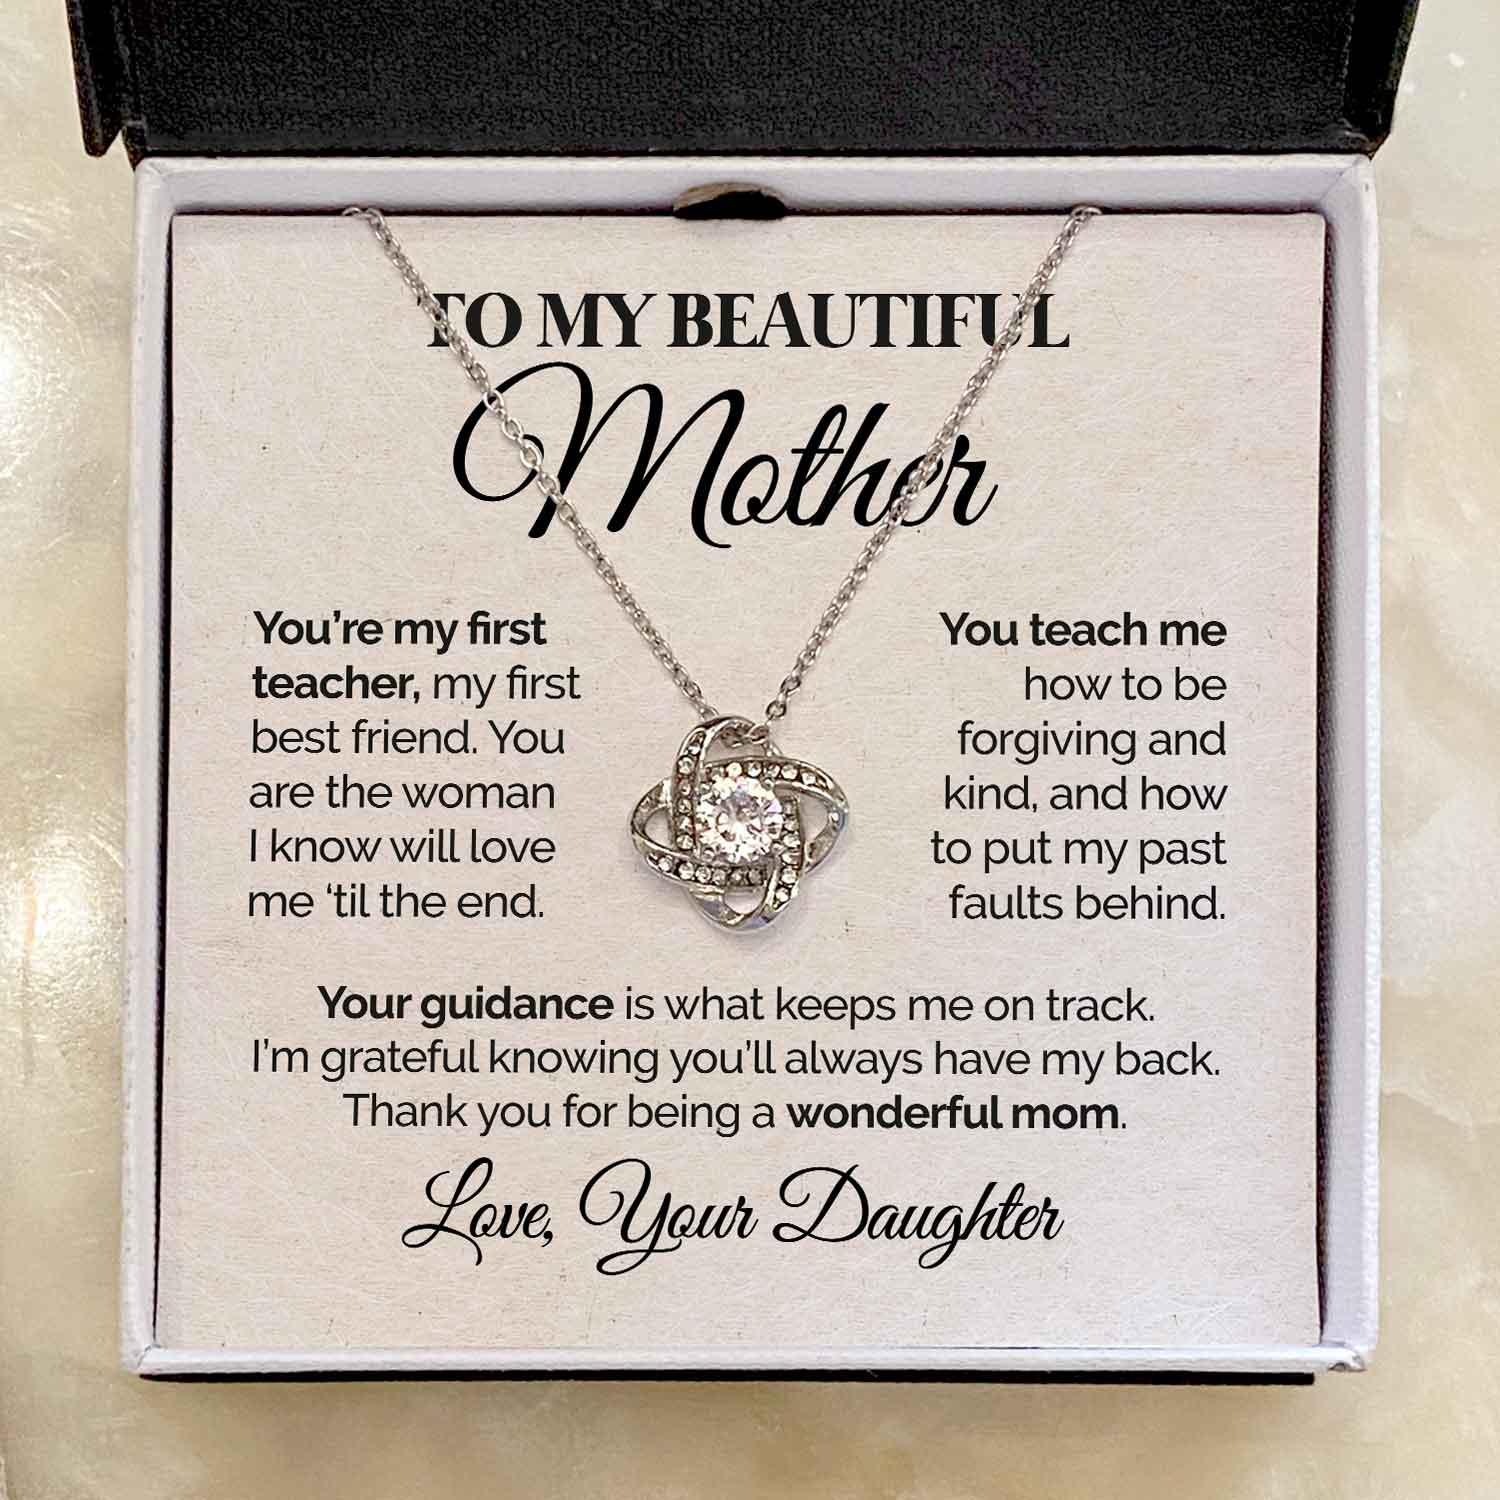 ShineOn Fulfillment Jewelry Mahogany Style Luxury Box (w/LED) To My Beautiful Mother - You're My First Teacher - Love Knot Necklace